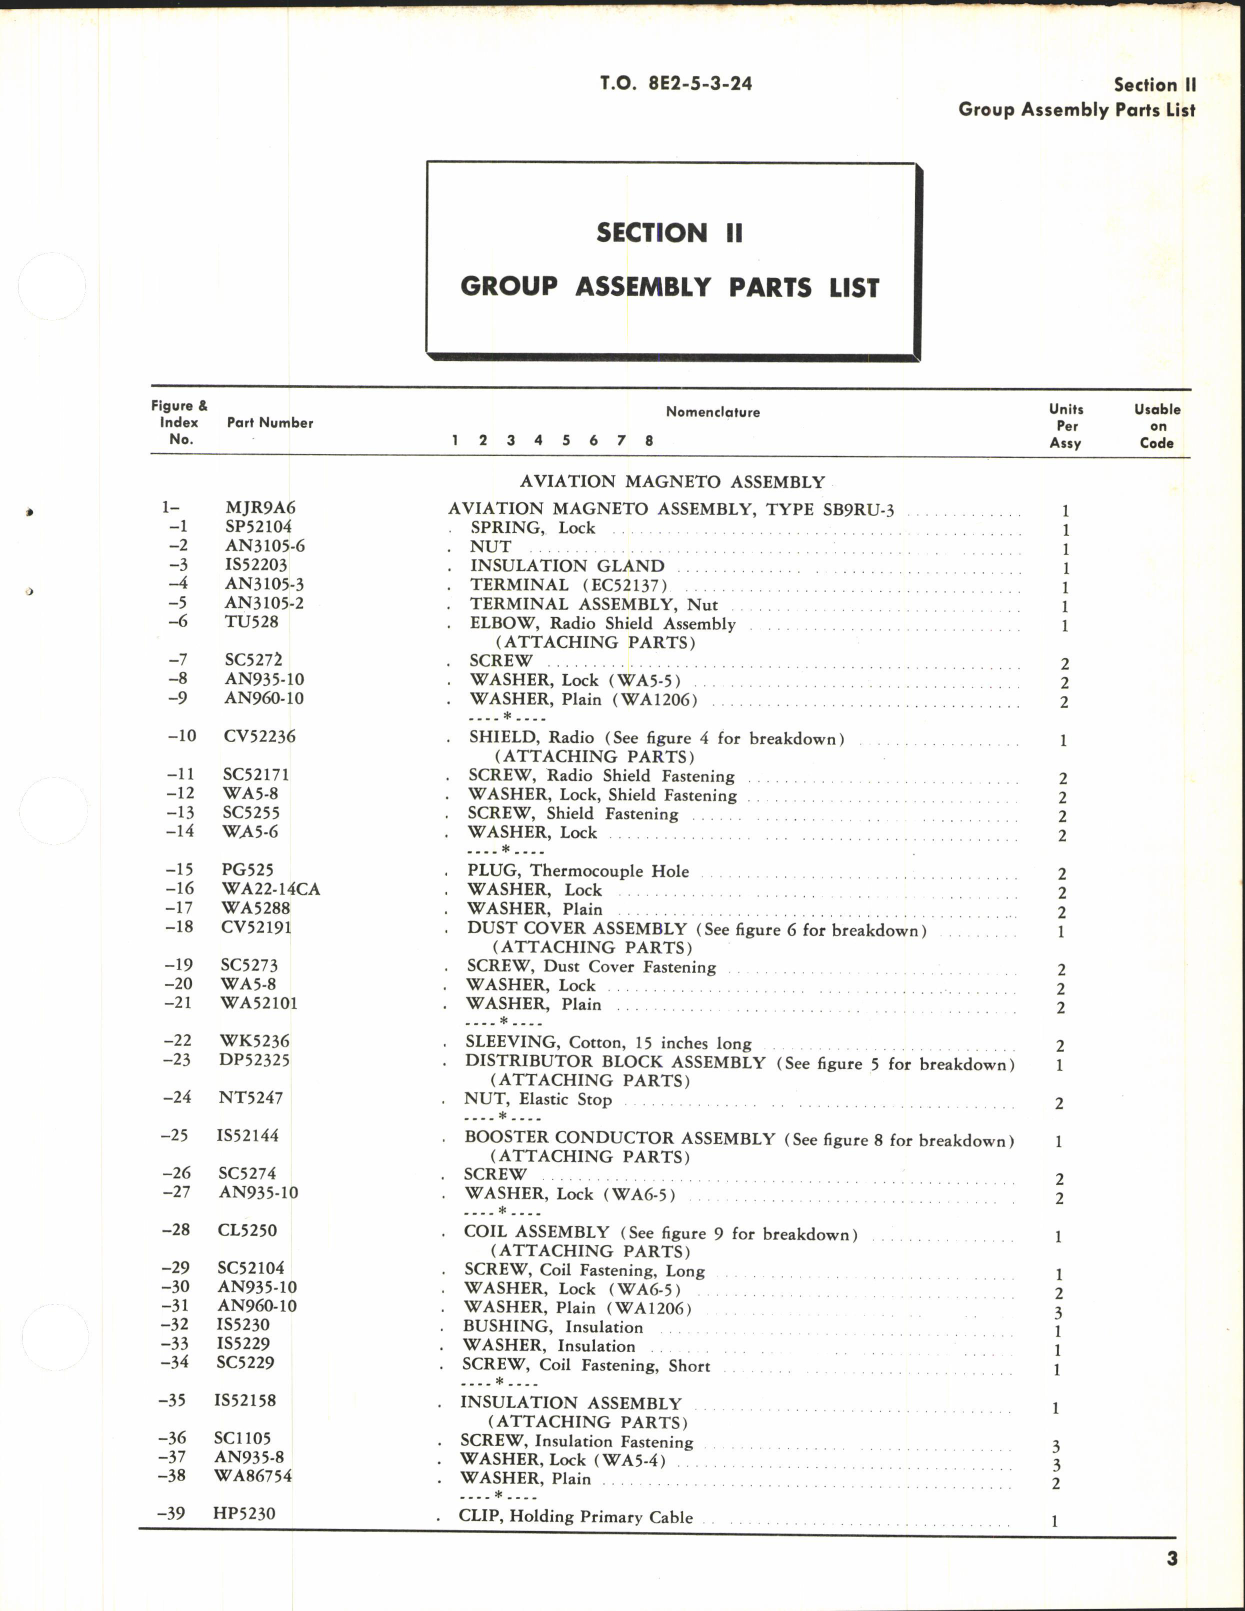 Sample page 7 from AirCorps Library document: Illustrated Parts Breakdown for Aircraft Magneto Type SB9RU-3